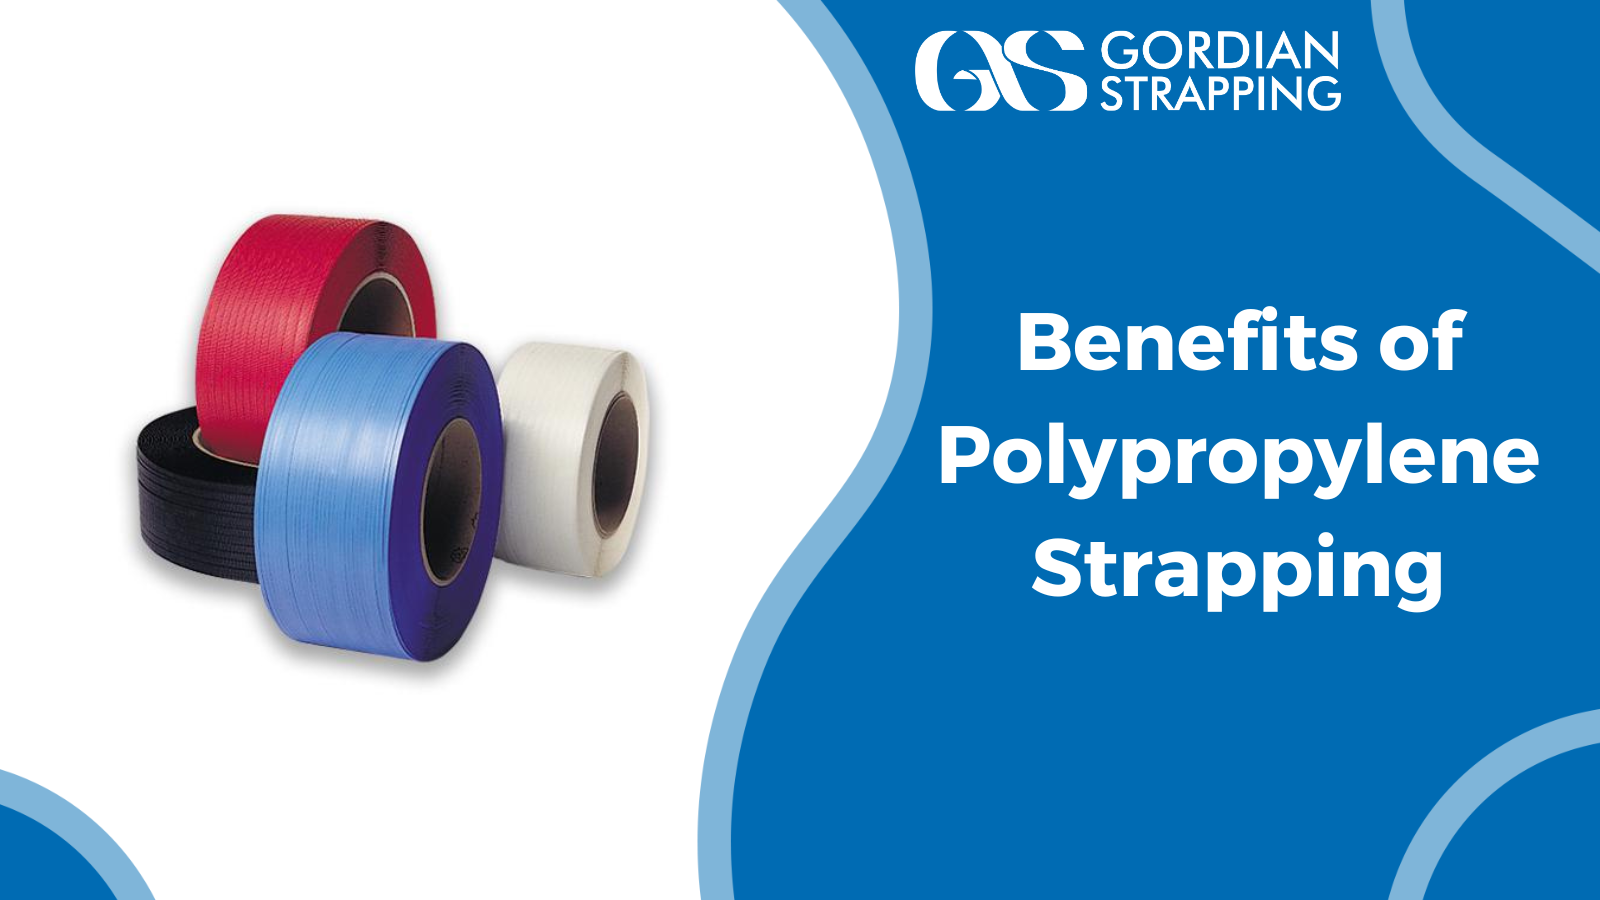 The Benefits of Polypropylene Strapping